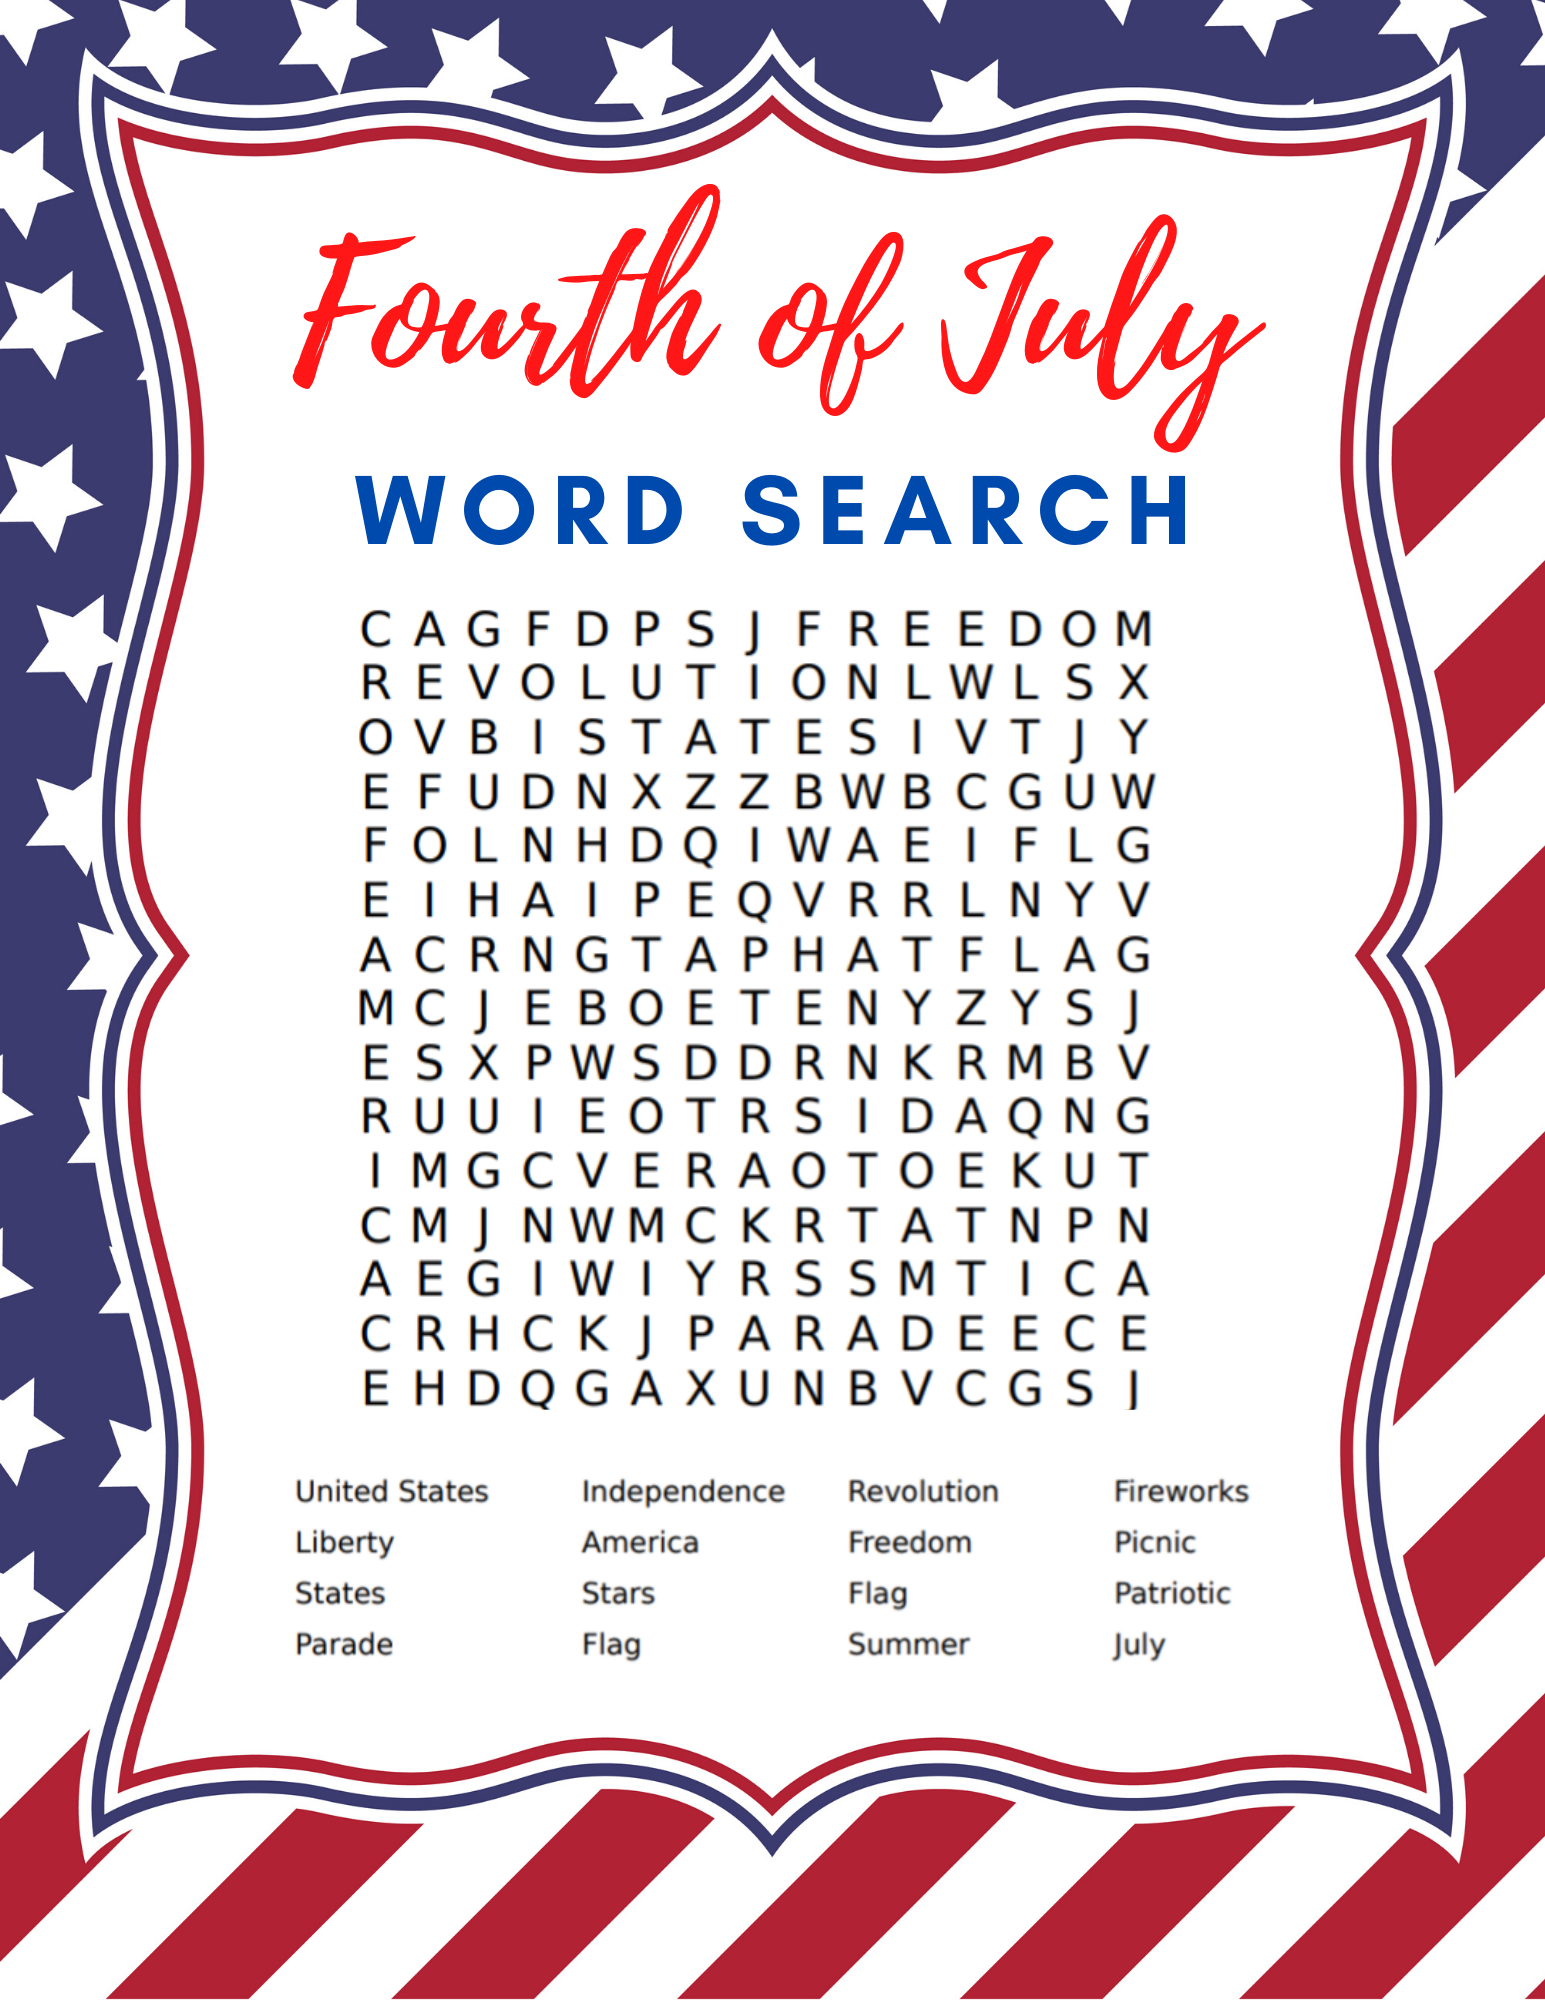 jumble words word search